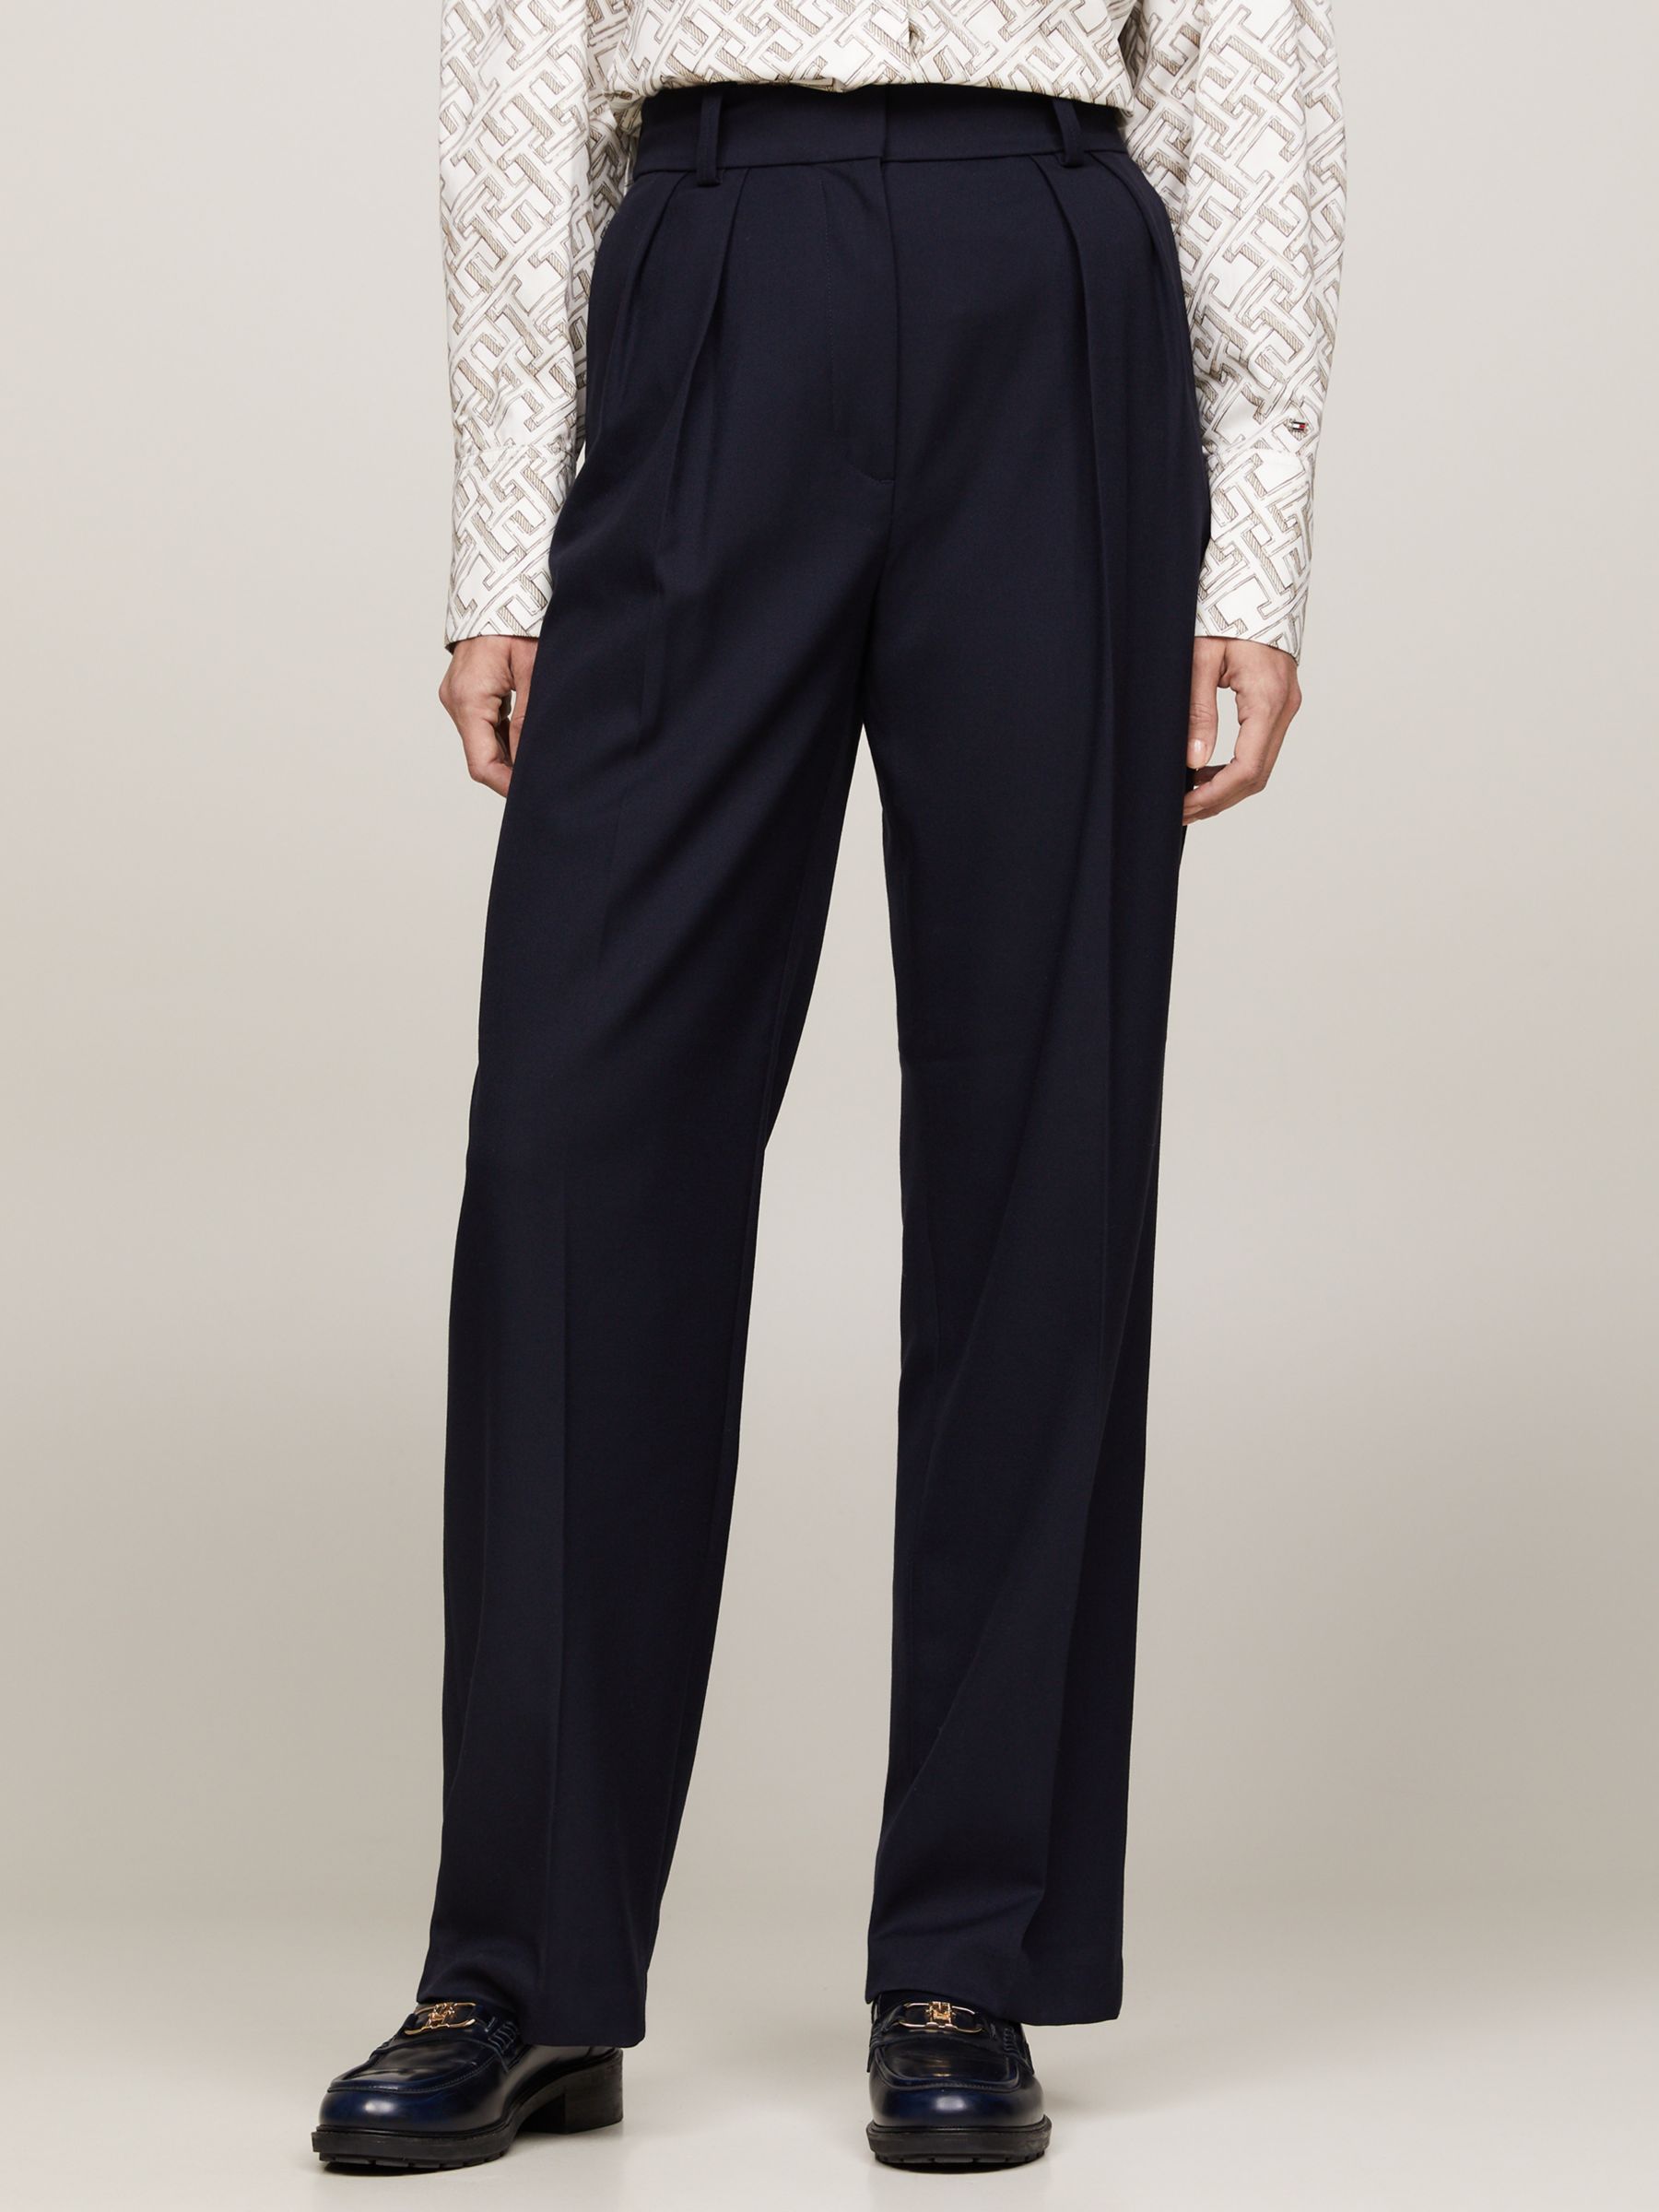 Tommy Hilfiger Relaxed Fit Pleat Detail Trousers, Desert Sky, 4